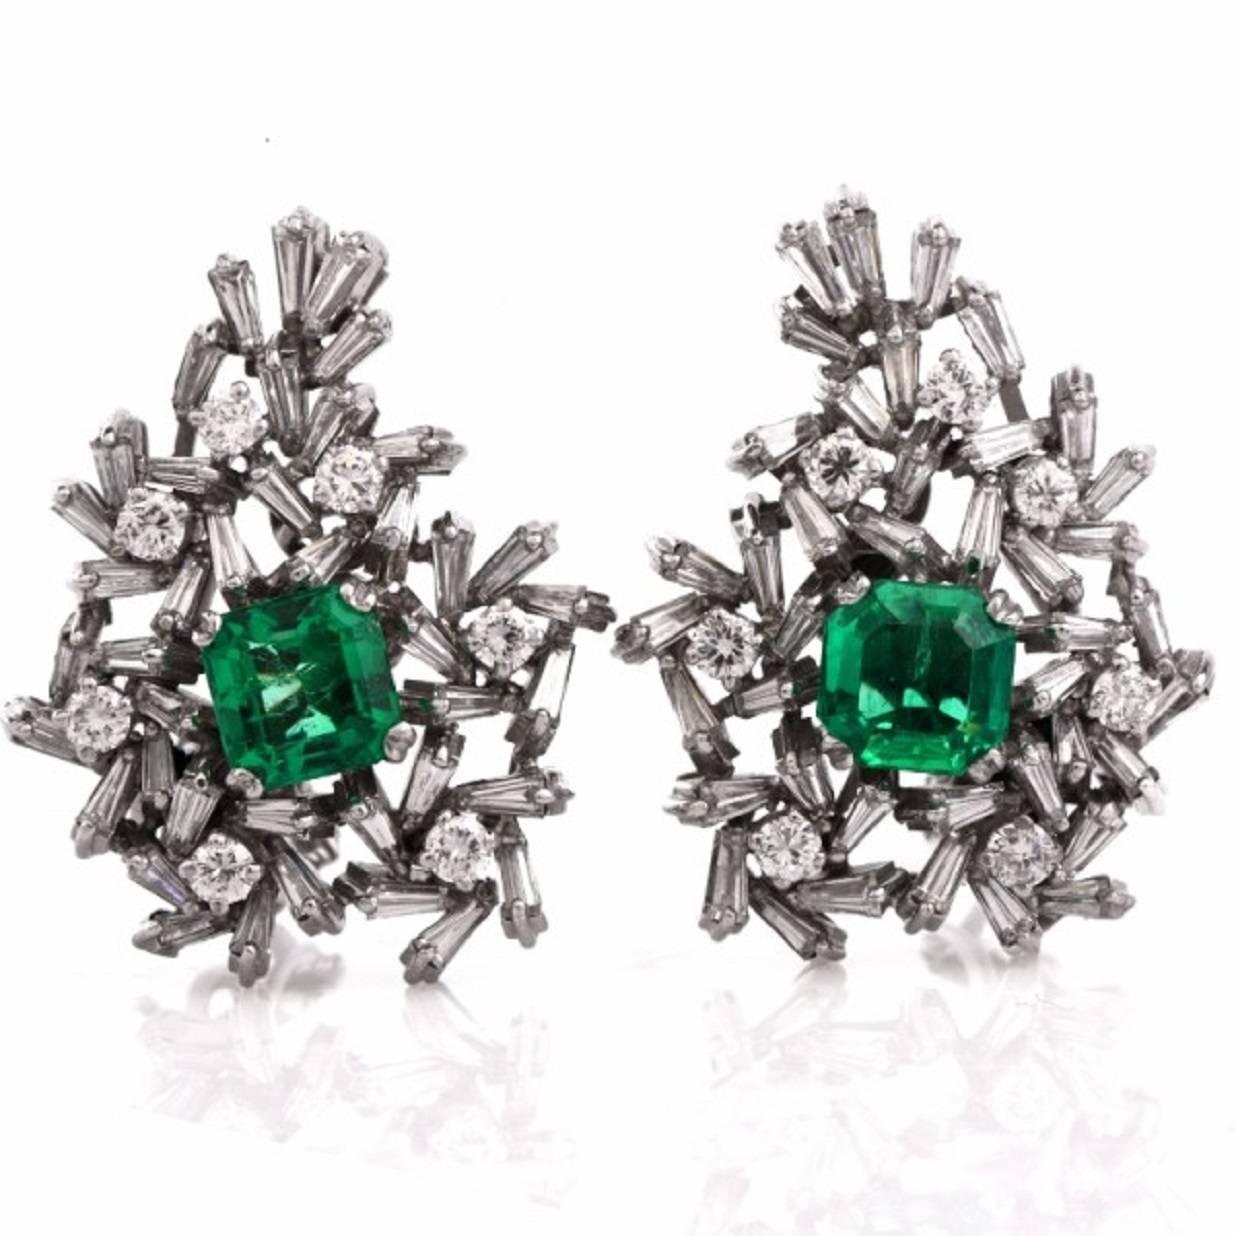 These conspicuous vintage earrings of sophisticated feminine aesthetic may be worn as a pair of clip brooches. They expose each a genuine ascher-cut genuine high quality emeralds at the center. They are surrounded by a sparkling assemblage of